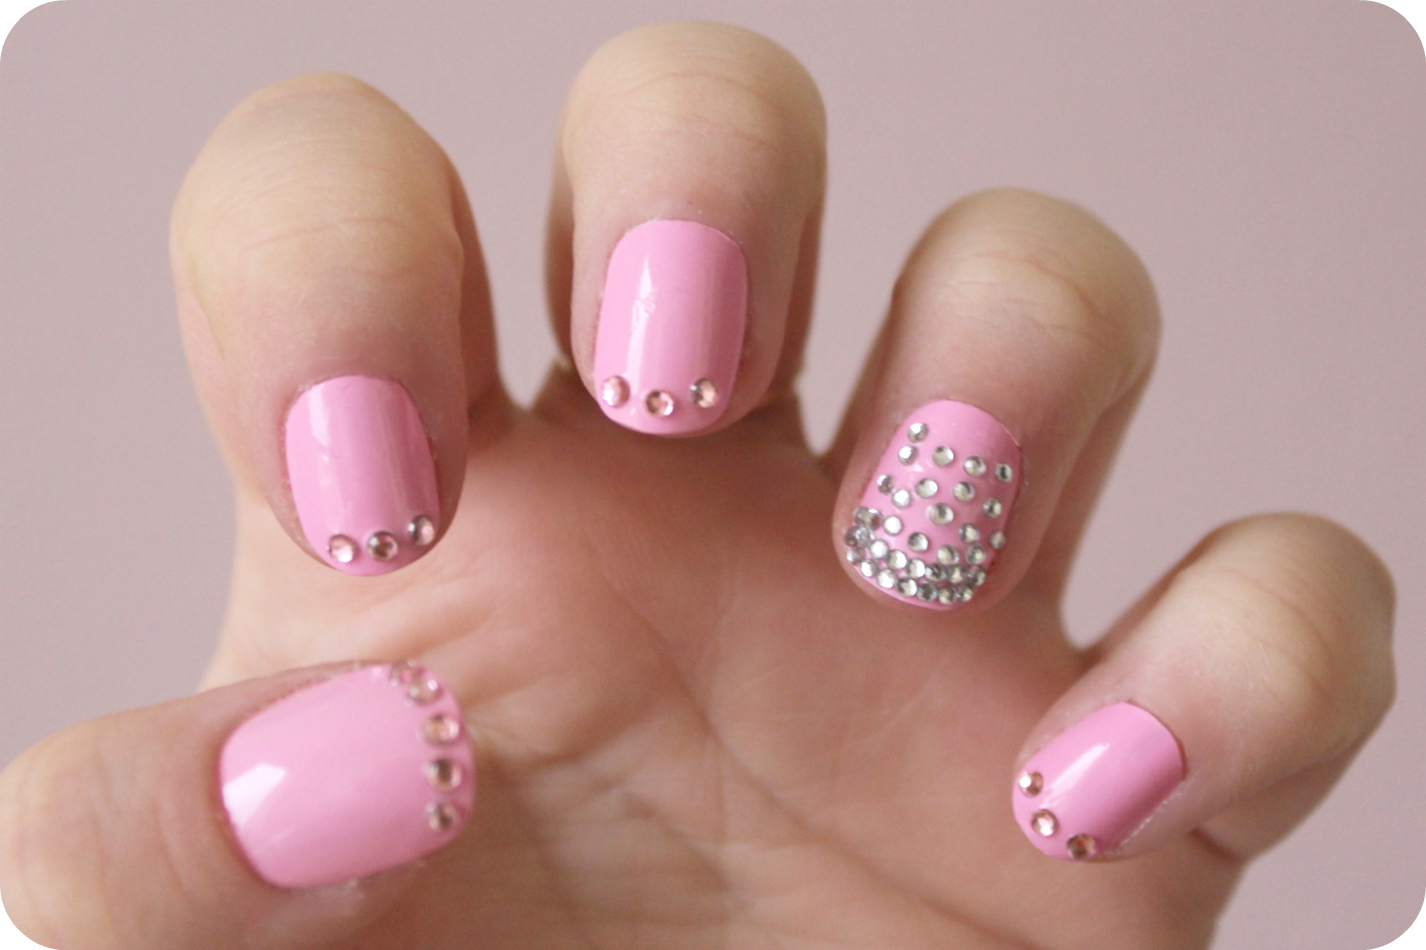 7. How to Apply Different Sized Nail Art Gems - wide 4